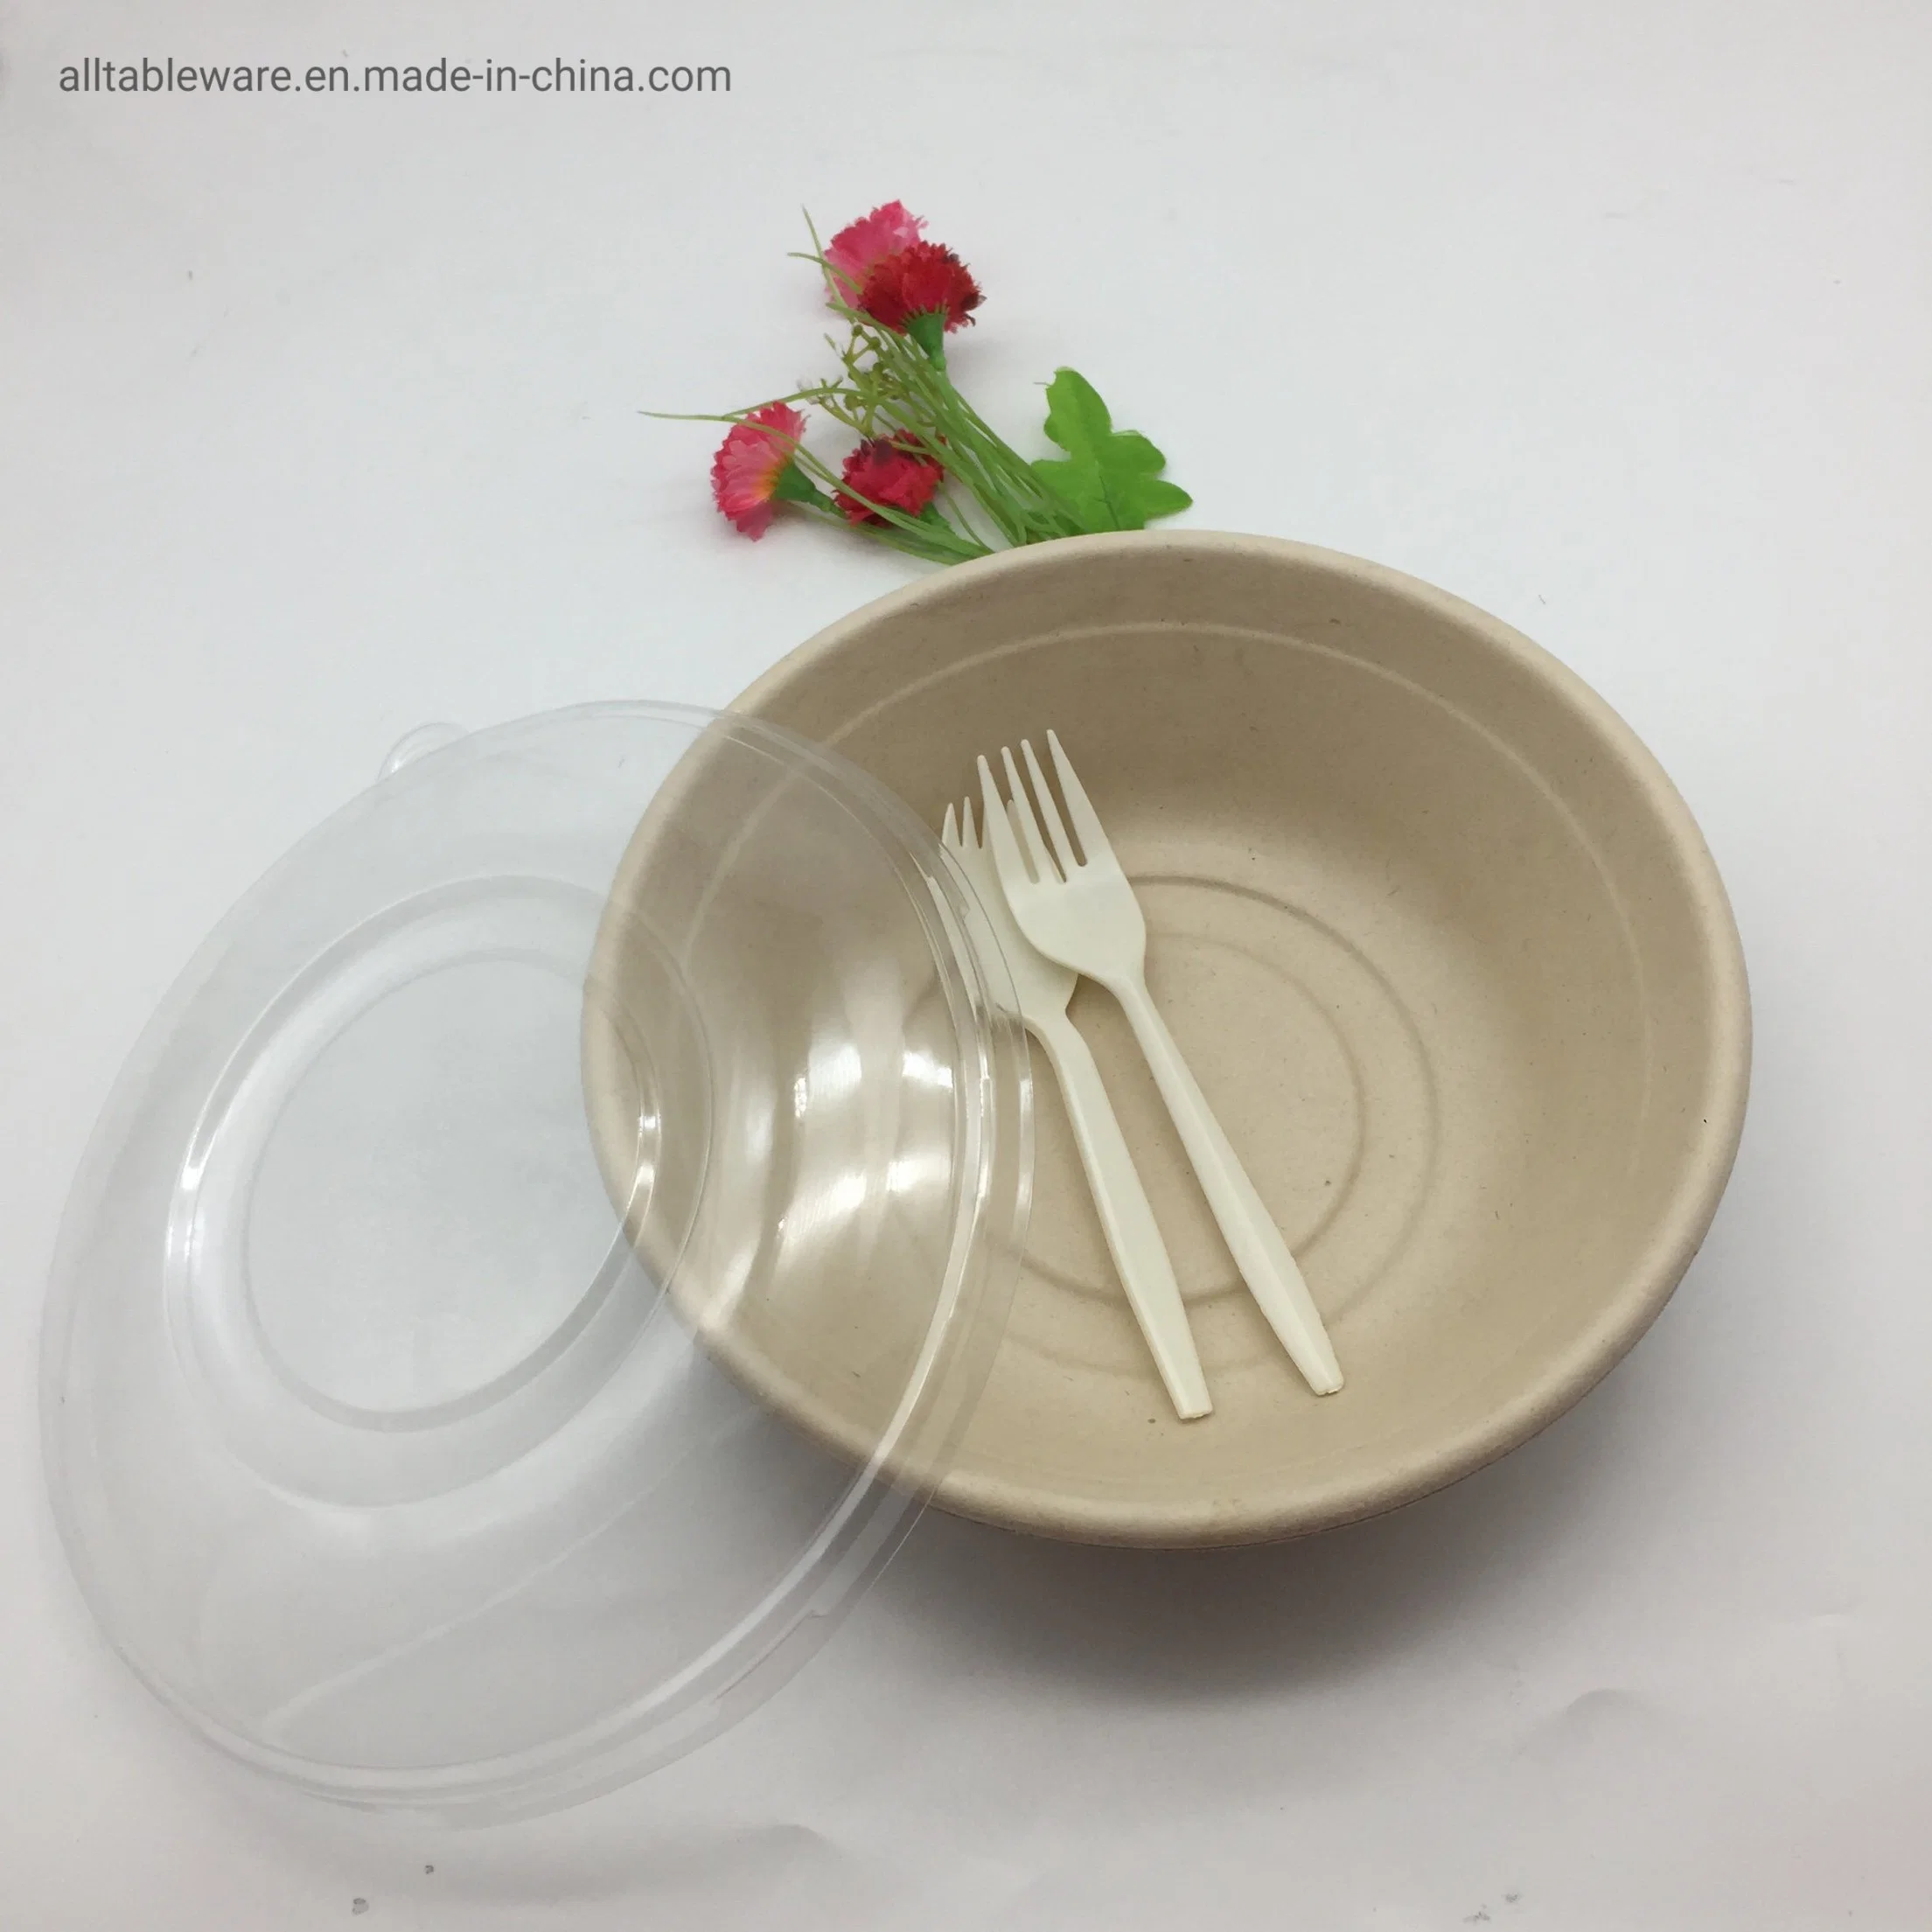 Biodegradable Sugarcane Bagasse 1000ml Round Container of Salad Bowl with Clear Cover